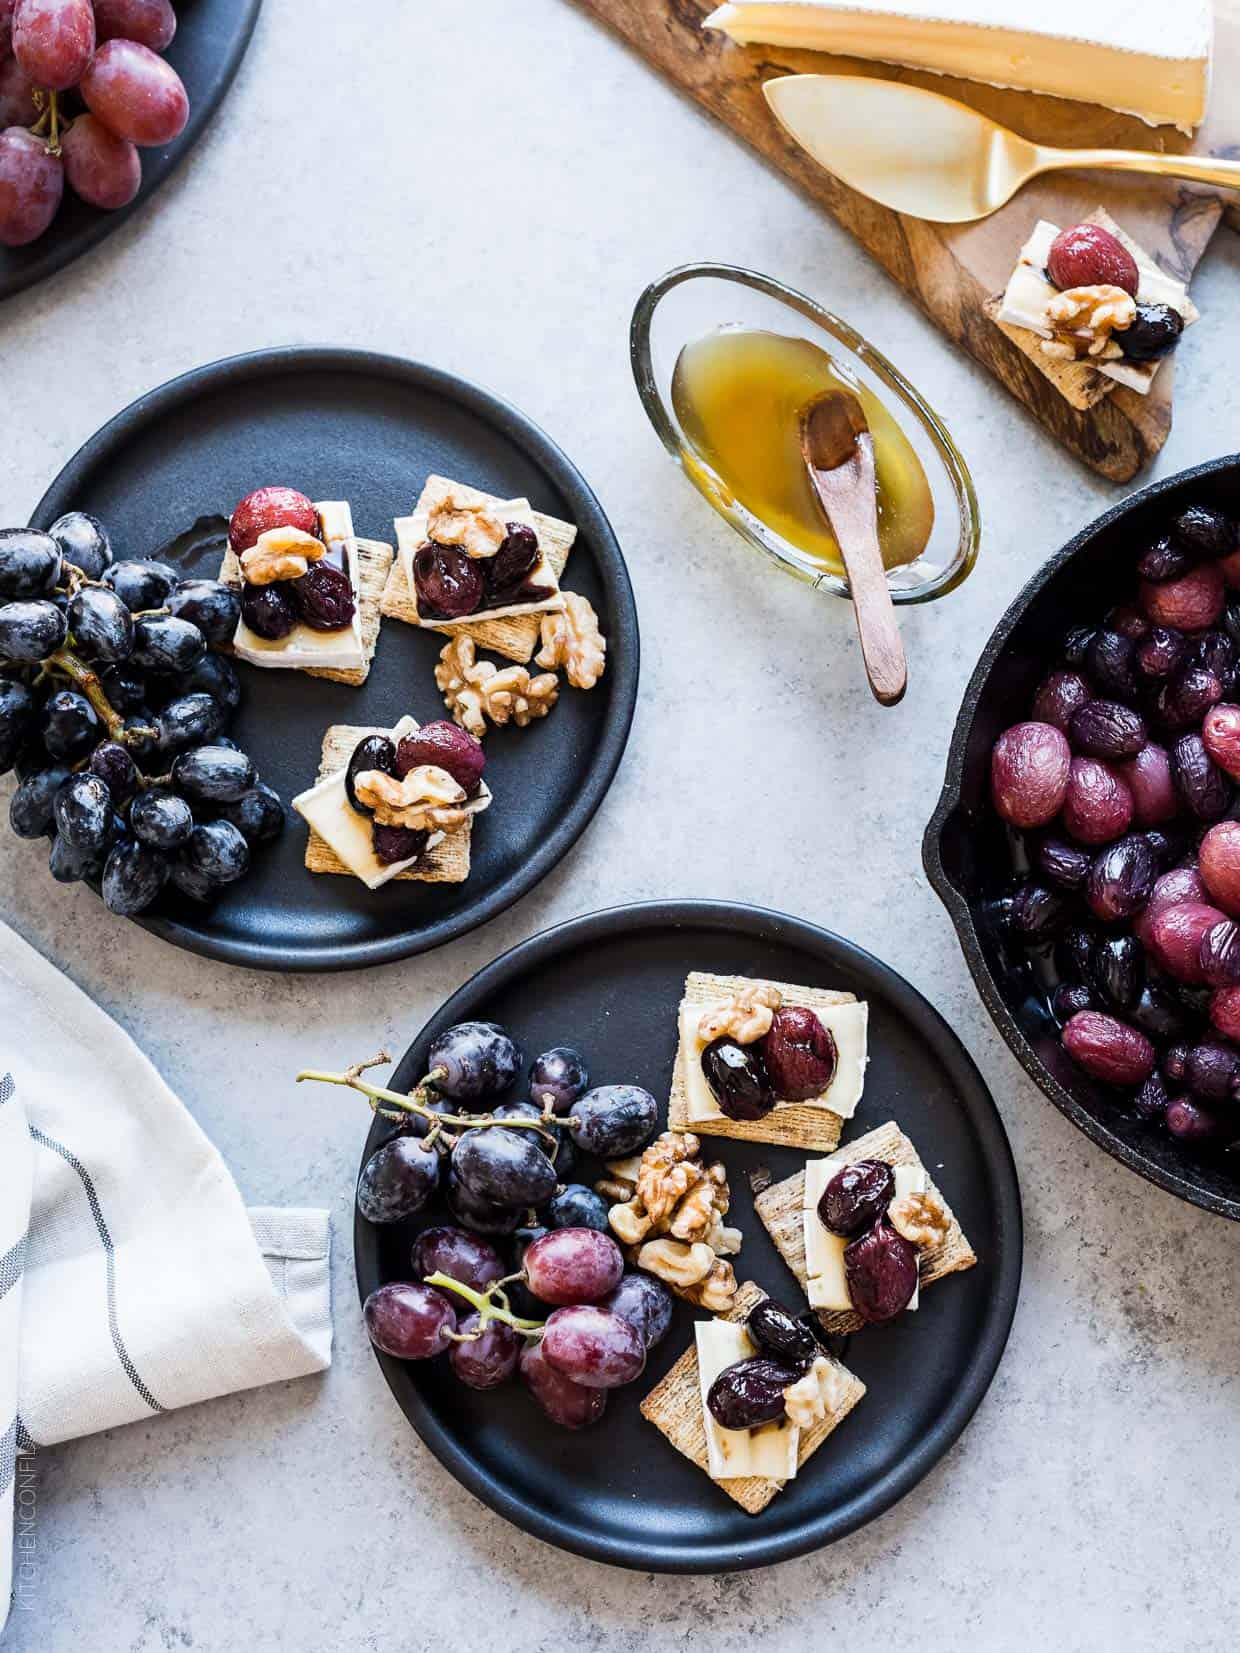 Caramelized Grape, Brie and Walnut Bites made with TRISCUIT crackers and served on dark plates with bunches of grapes.